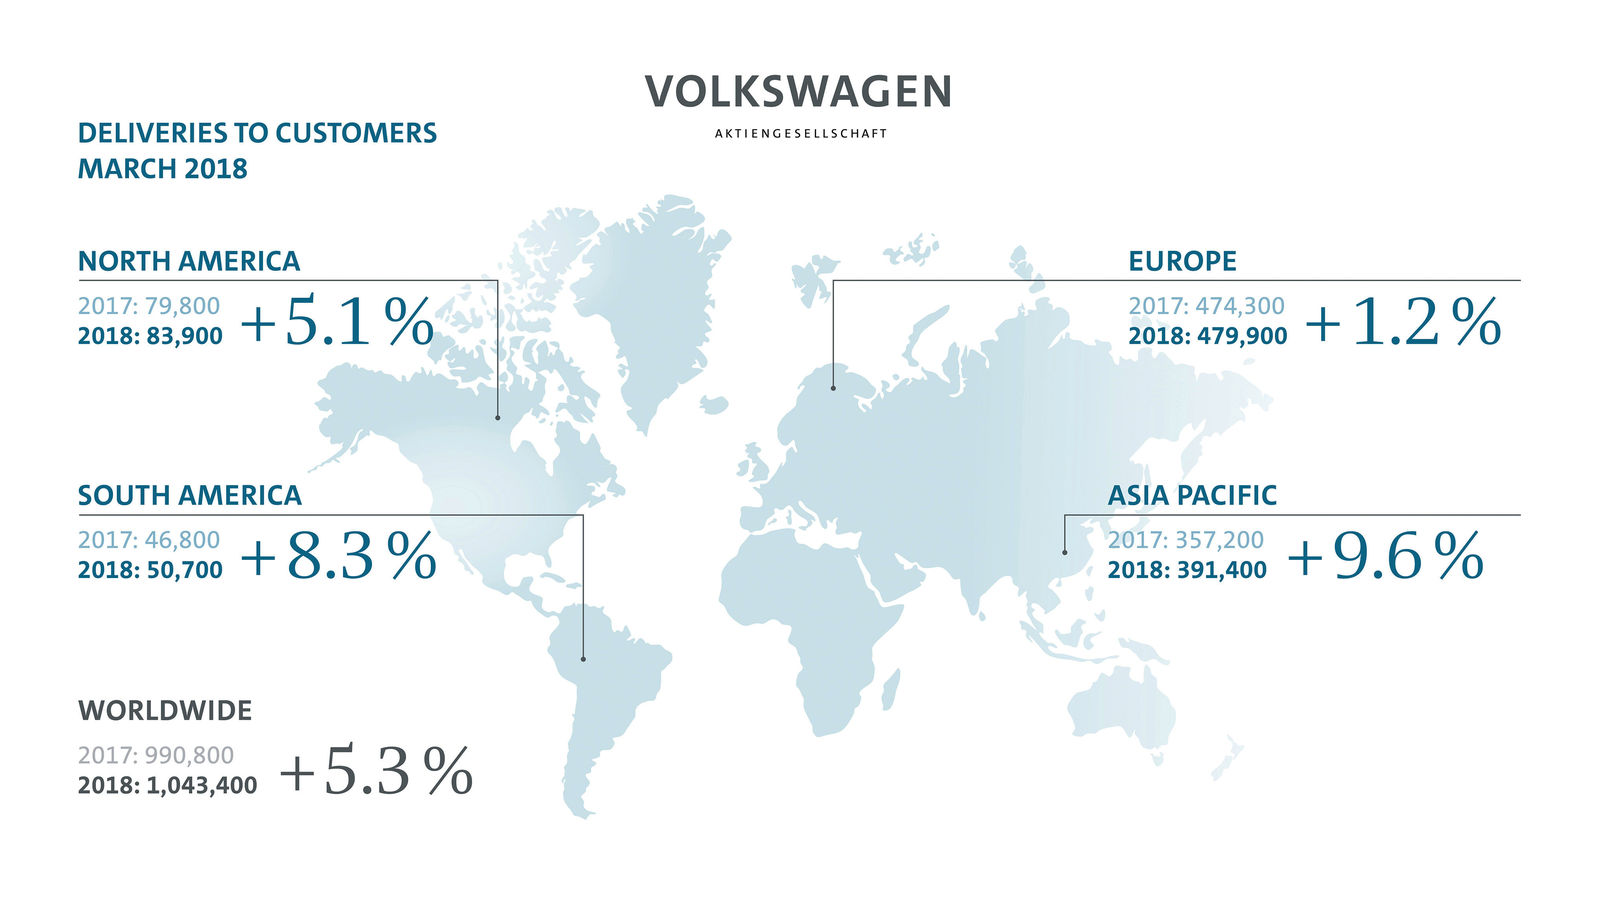 Volkswagen Group delivers over 1 million vehicles in March